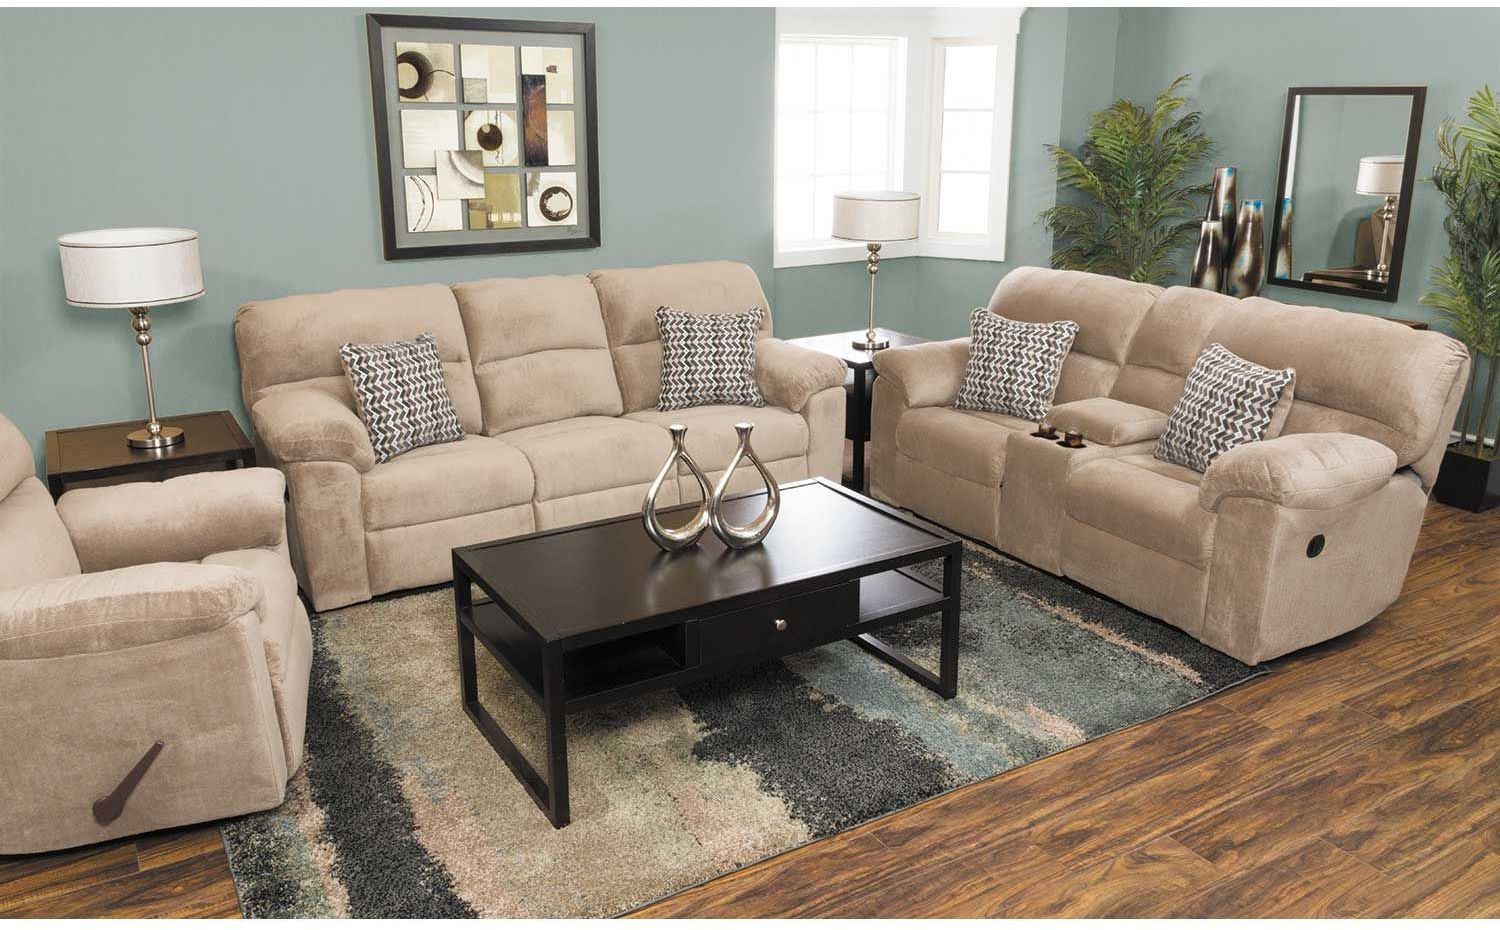 Chevron Seal Buy the Reclining Sofa and Loveseat Get the Matching Recliner FREE